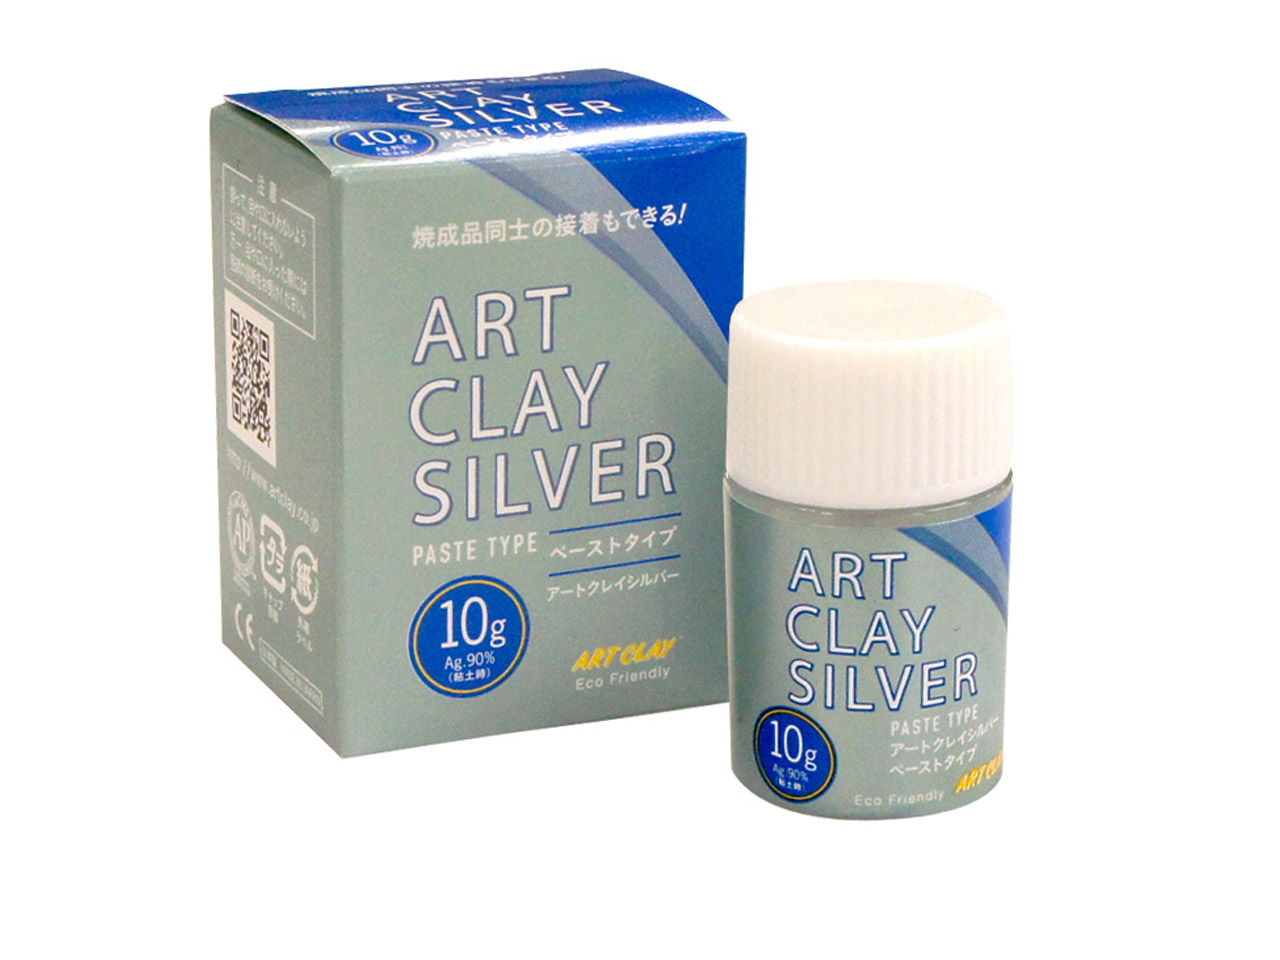 Art Clay Silver 10g Paste Questions & Answers